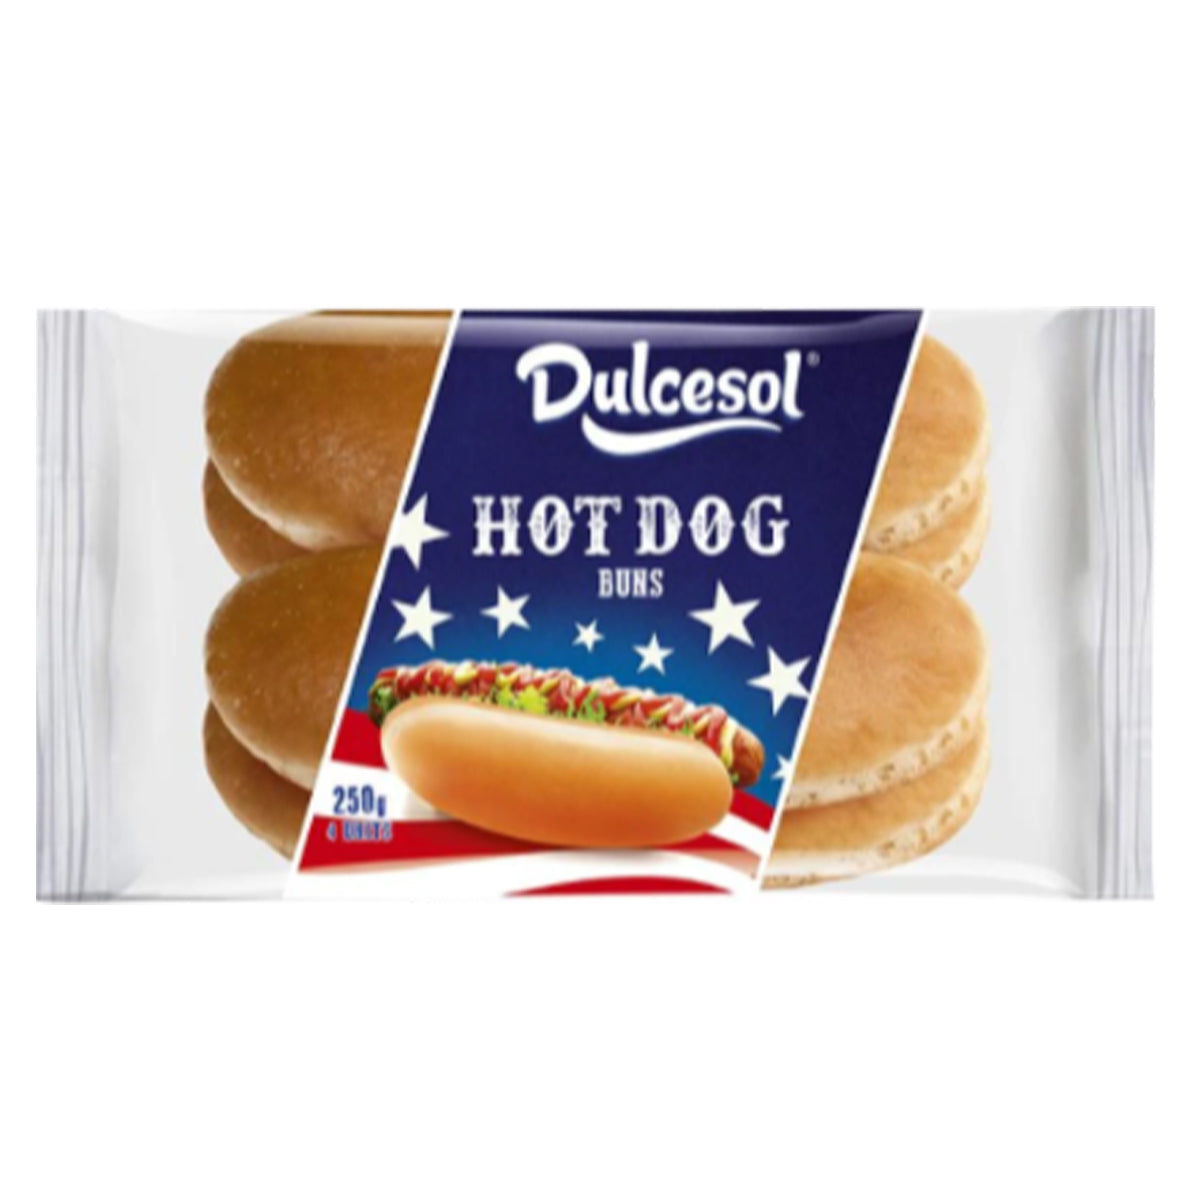 Dulcesol - Hot Dog Buns - 250g - Continental Food Store